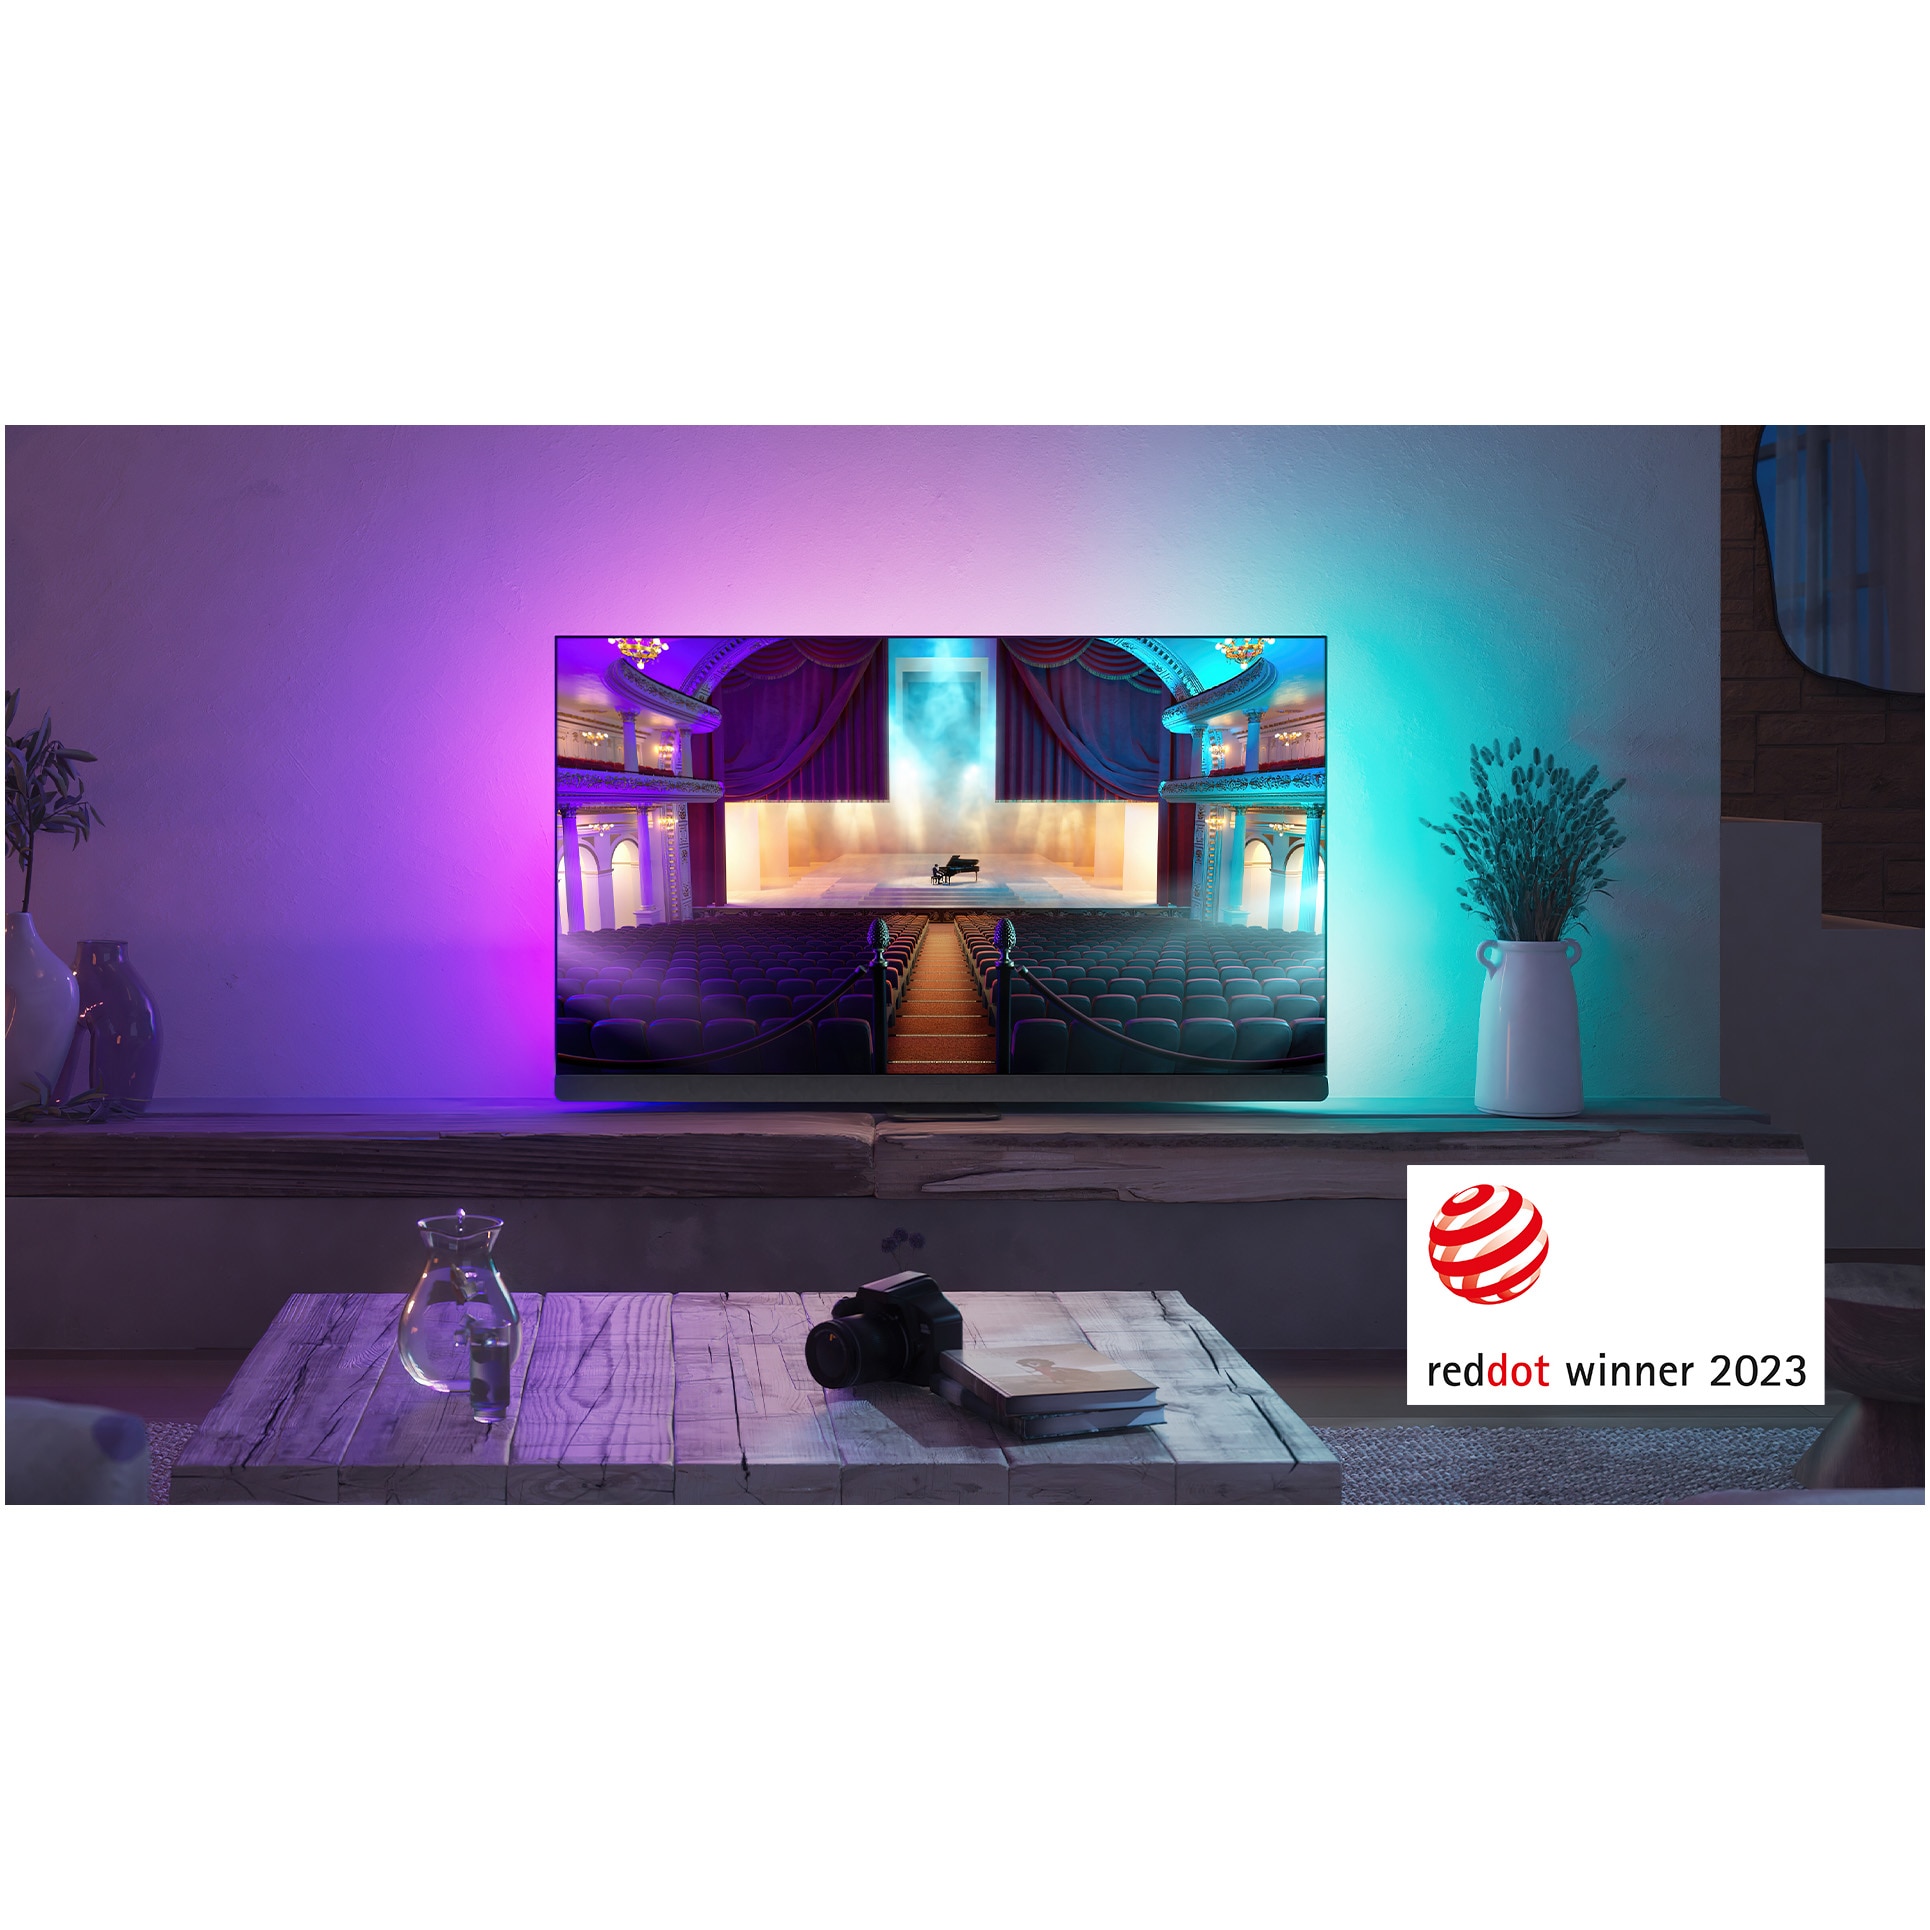 Philips 55OLED908 UHD G-Sync 120Hz Freesync, Enhanced, VRR, Vision&Atmos, Ambilight 4K OLED HDR10+, IMAX 139cm Dolby Google TV Bowers&Wilkins, 55